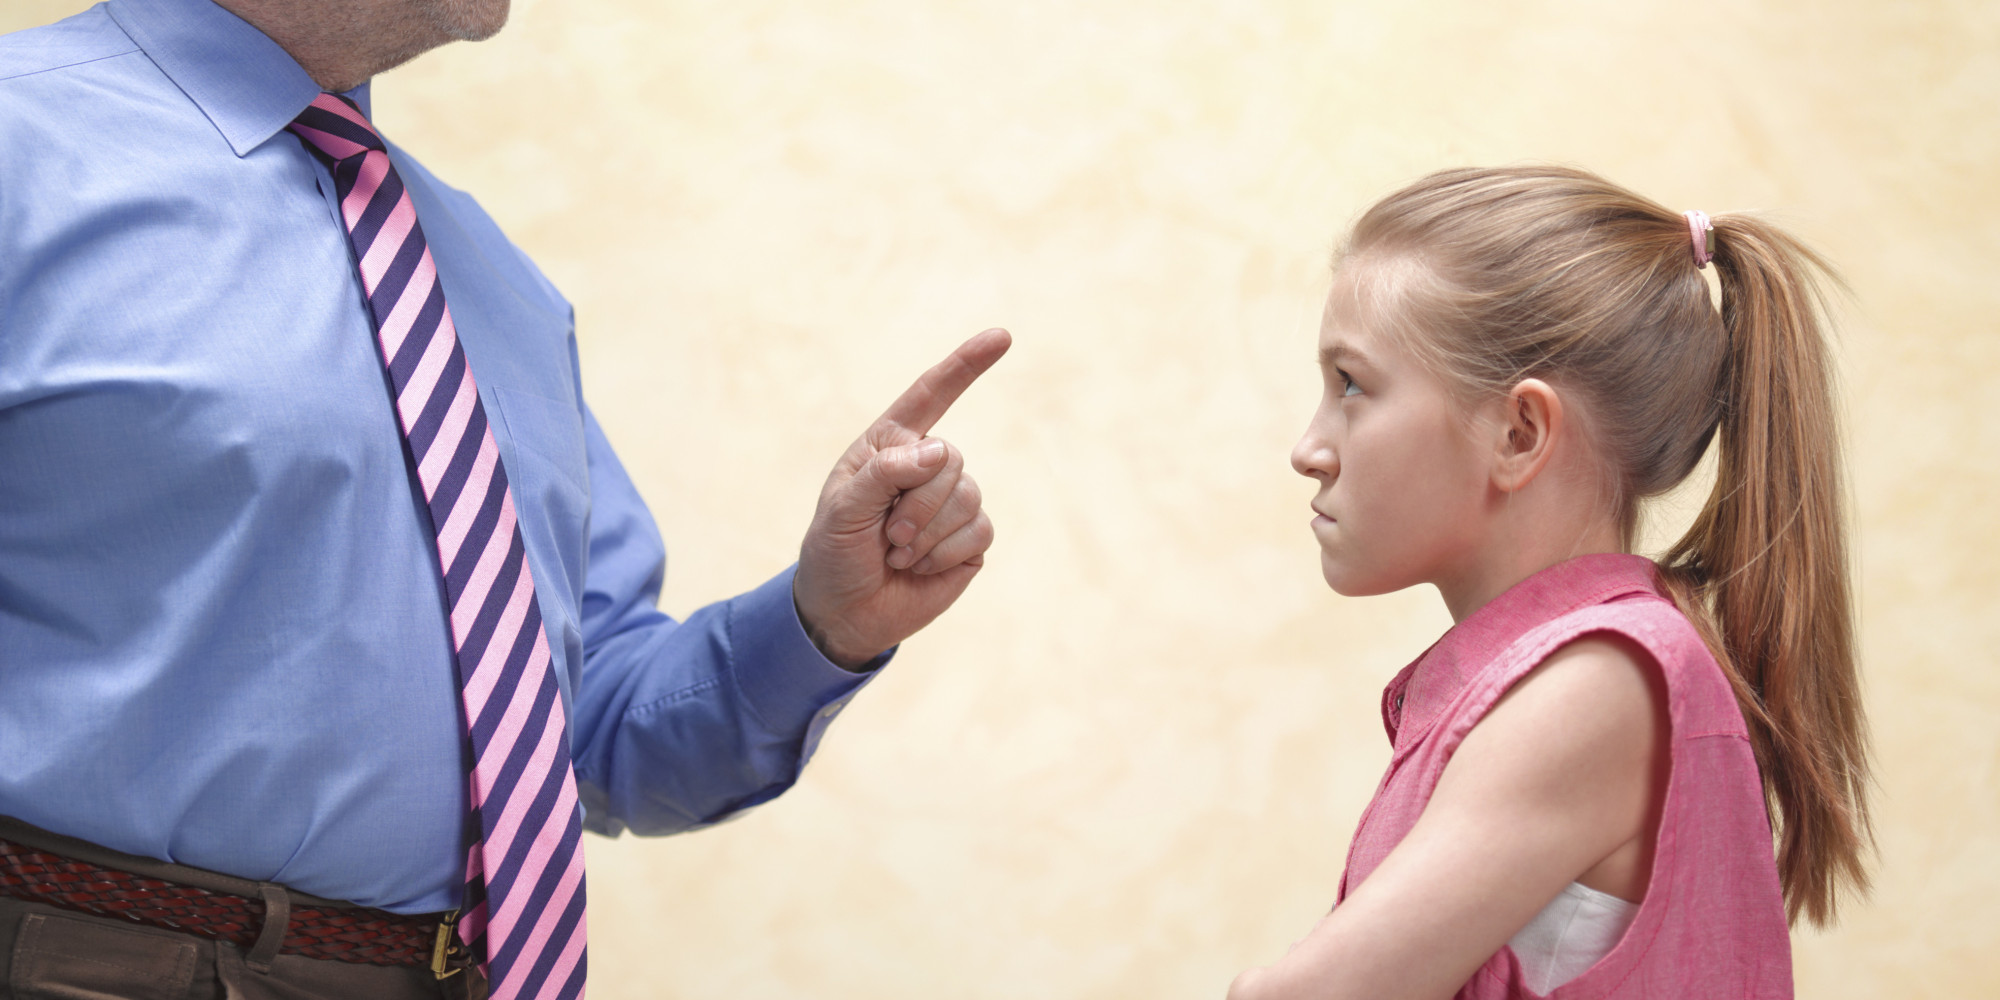 Punishment or Talk: Which Is The Best Way To Raise A Child